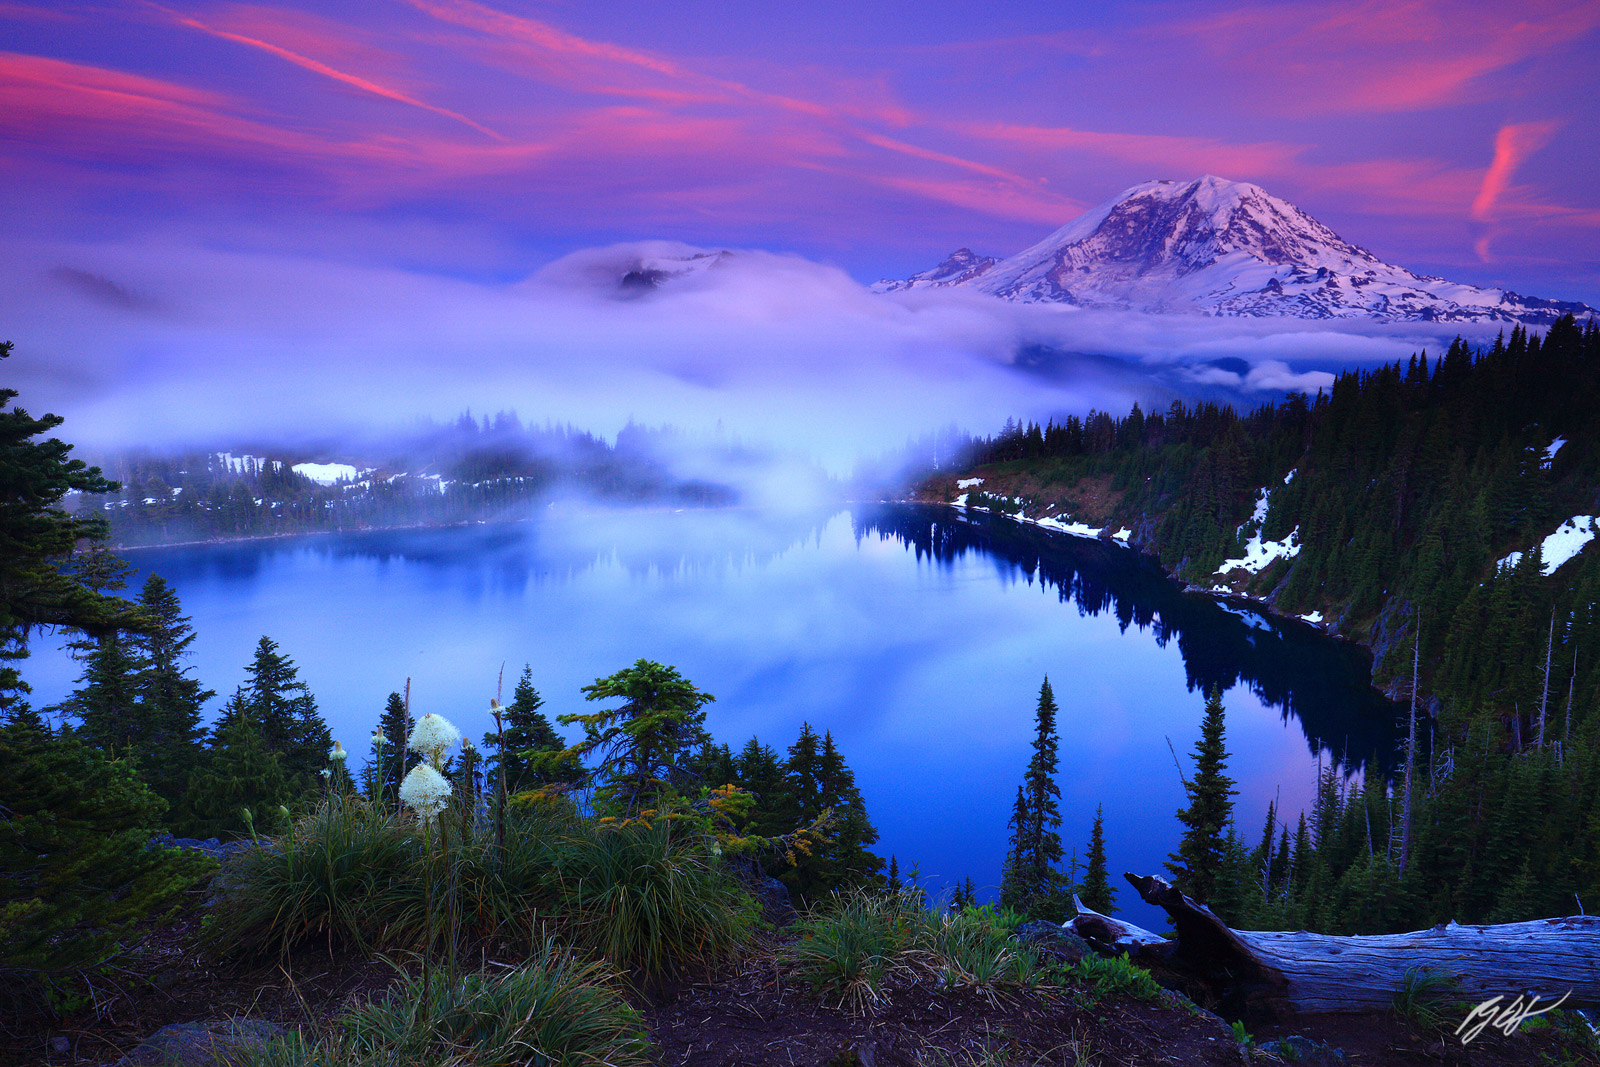 Sunset Mt Rainier and Summit Lake from the Clearwater Wilderness in Washington